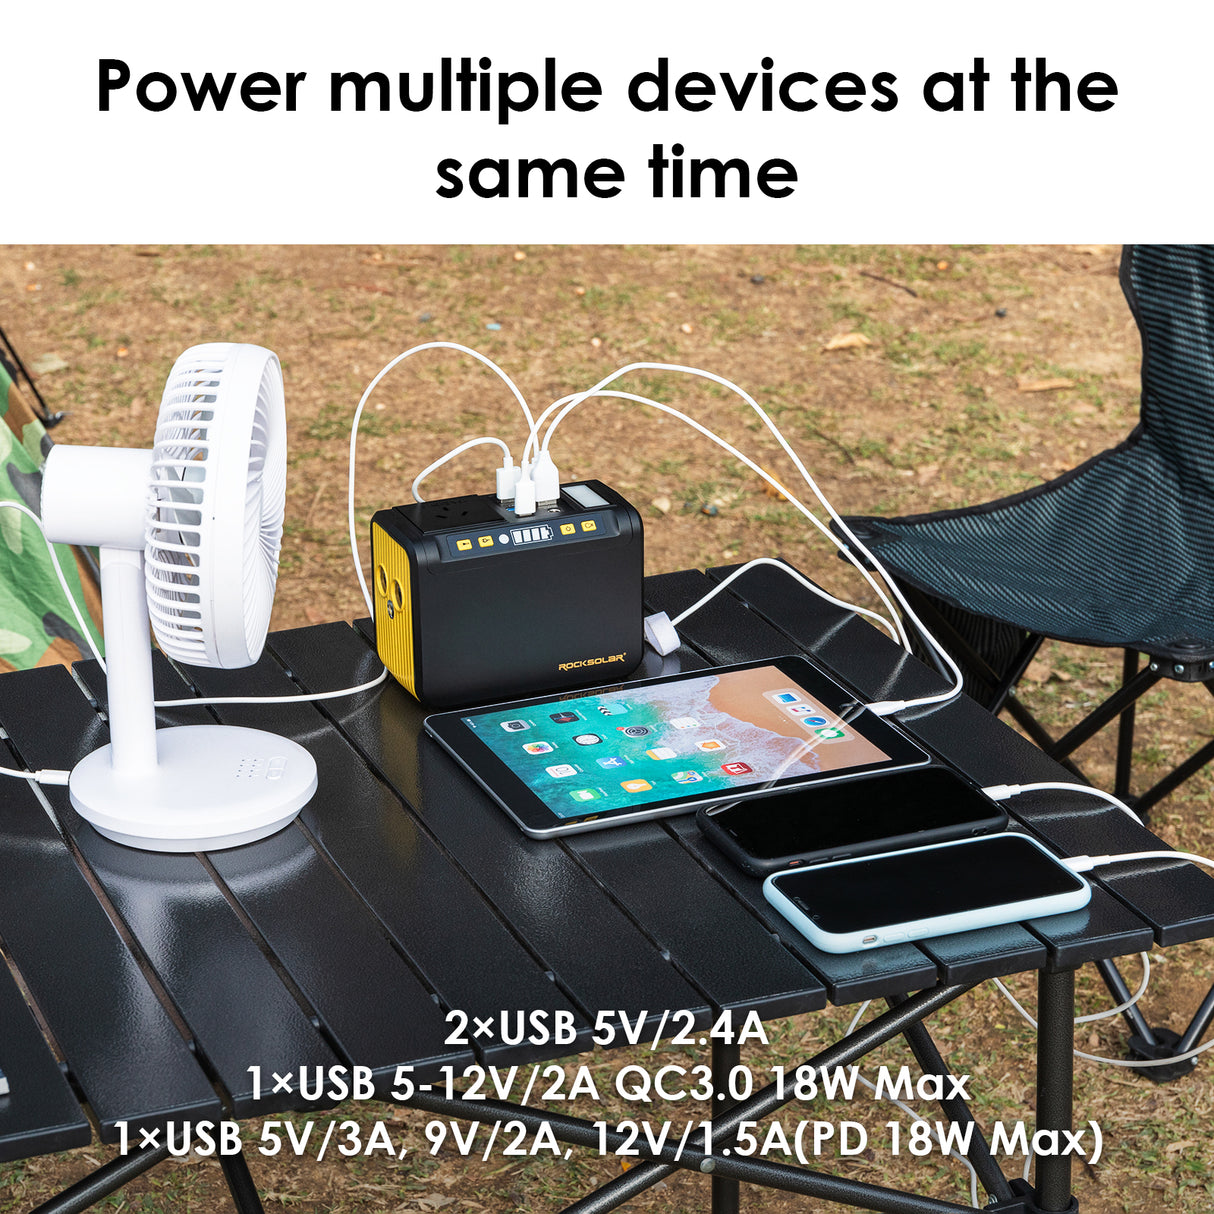 Weekender 80W 88Wh Portable Power Station